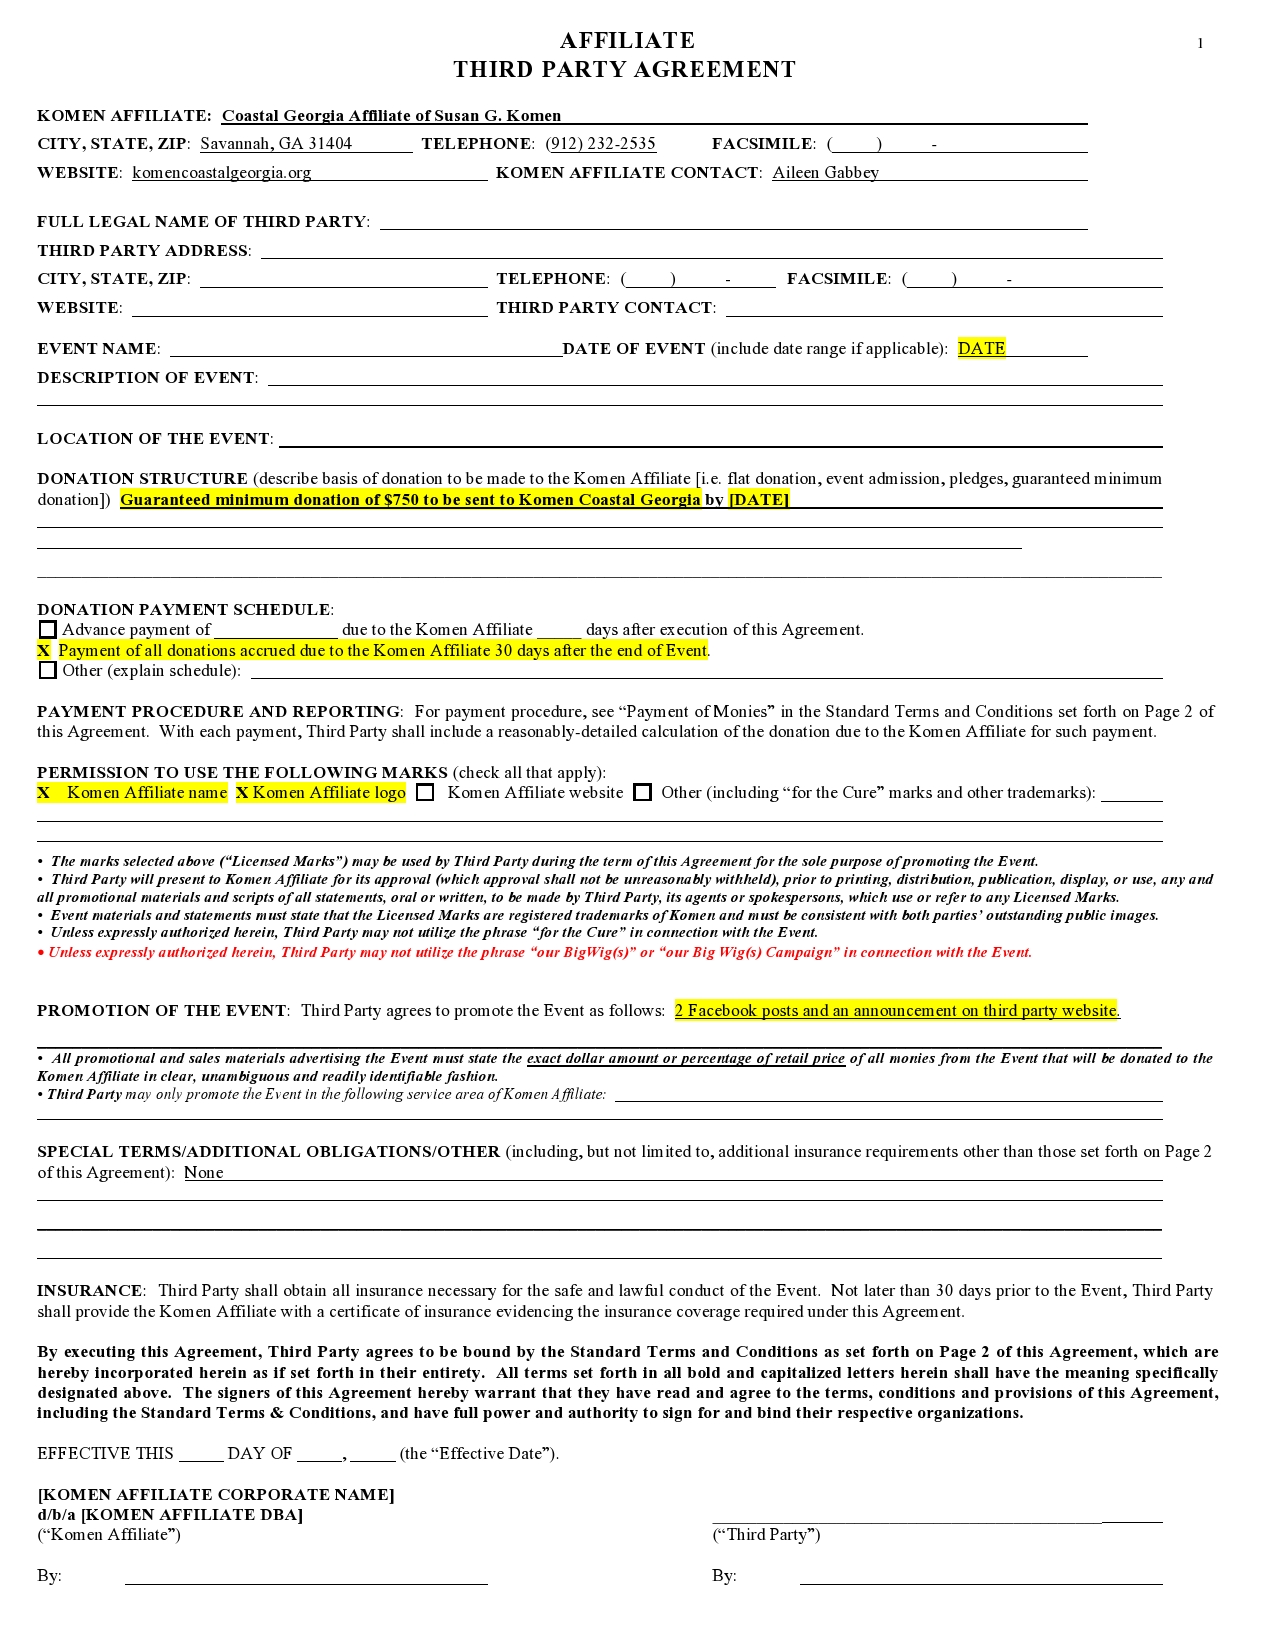 Free affiliate agreement 34